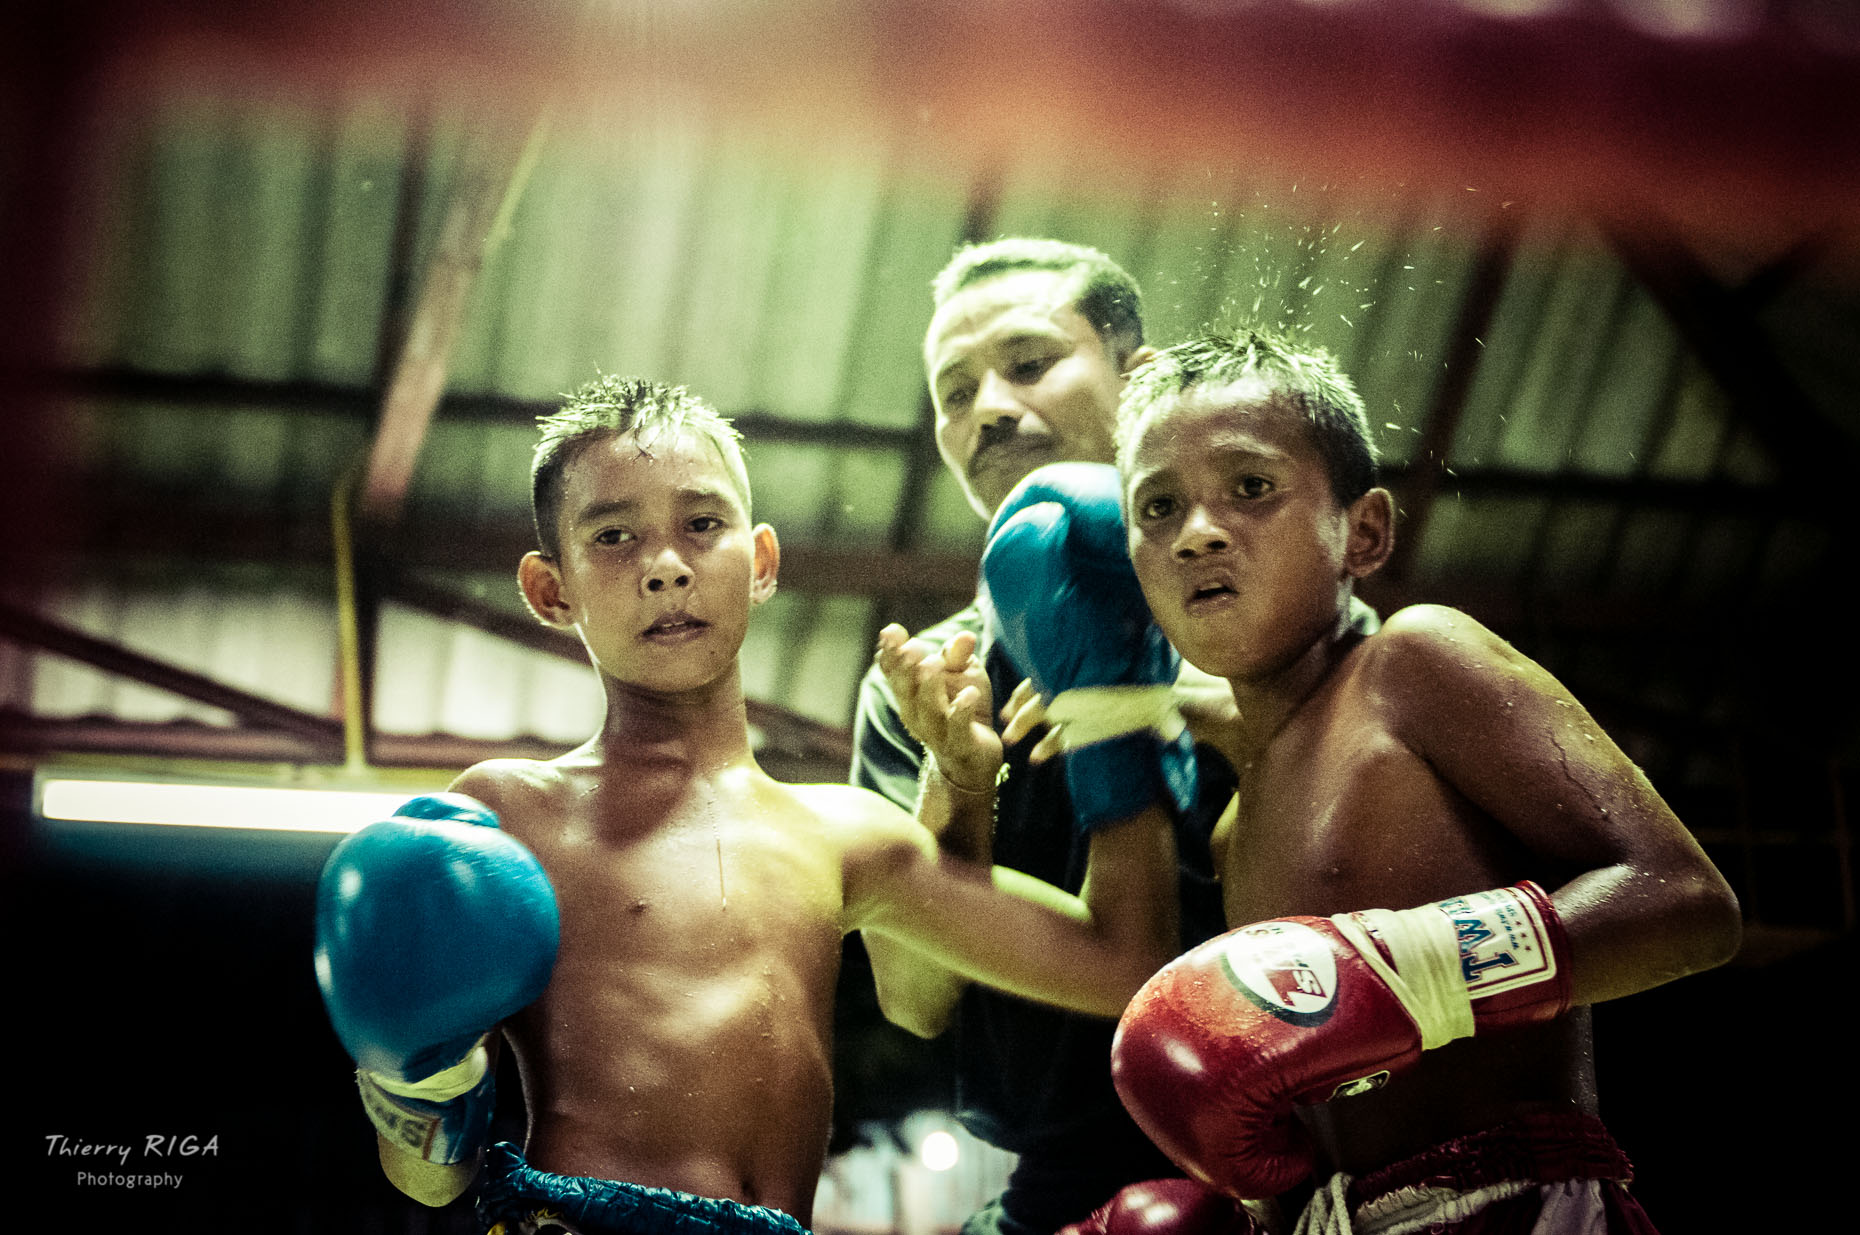 kids boxing Muay Thai in thailand, at the end of the round